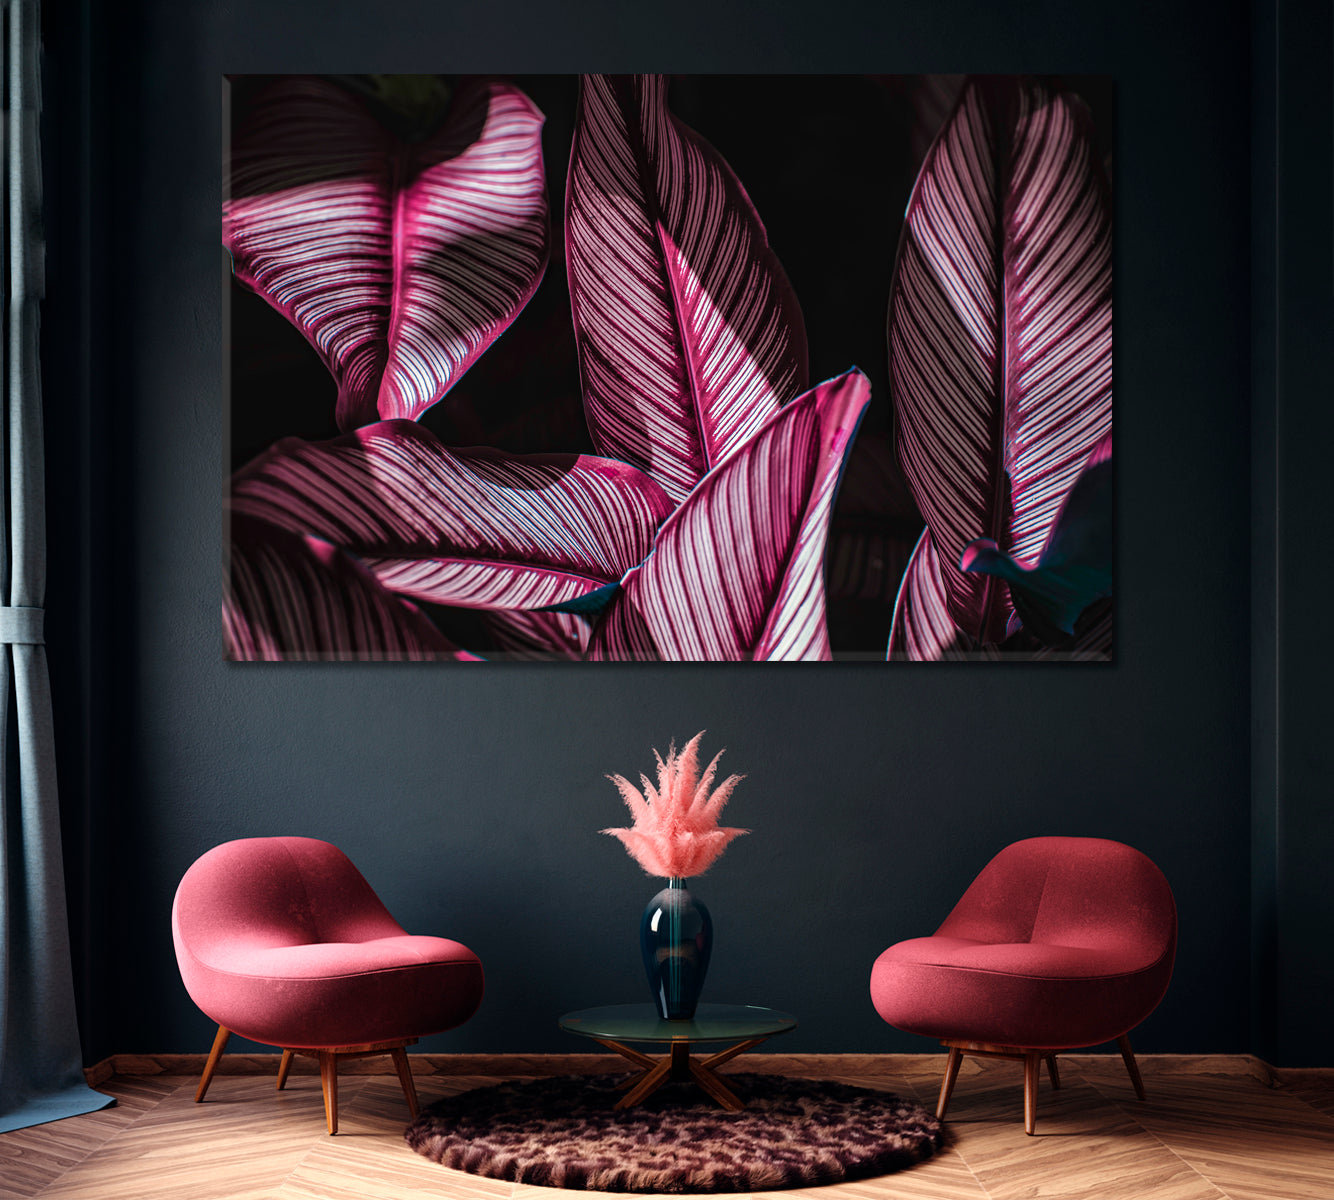 Purple Tropical Leaves Canvas Print ArtLexy 1 Panel 24"x16" inches 